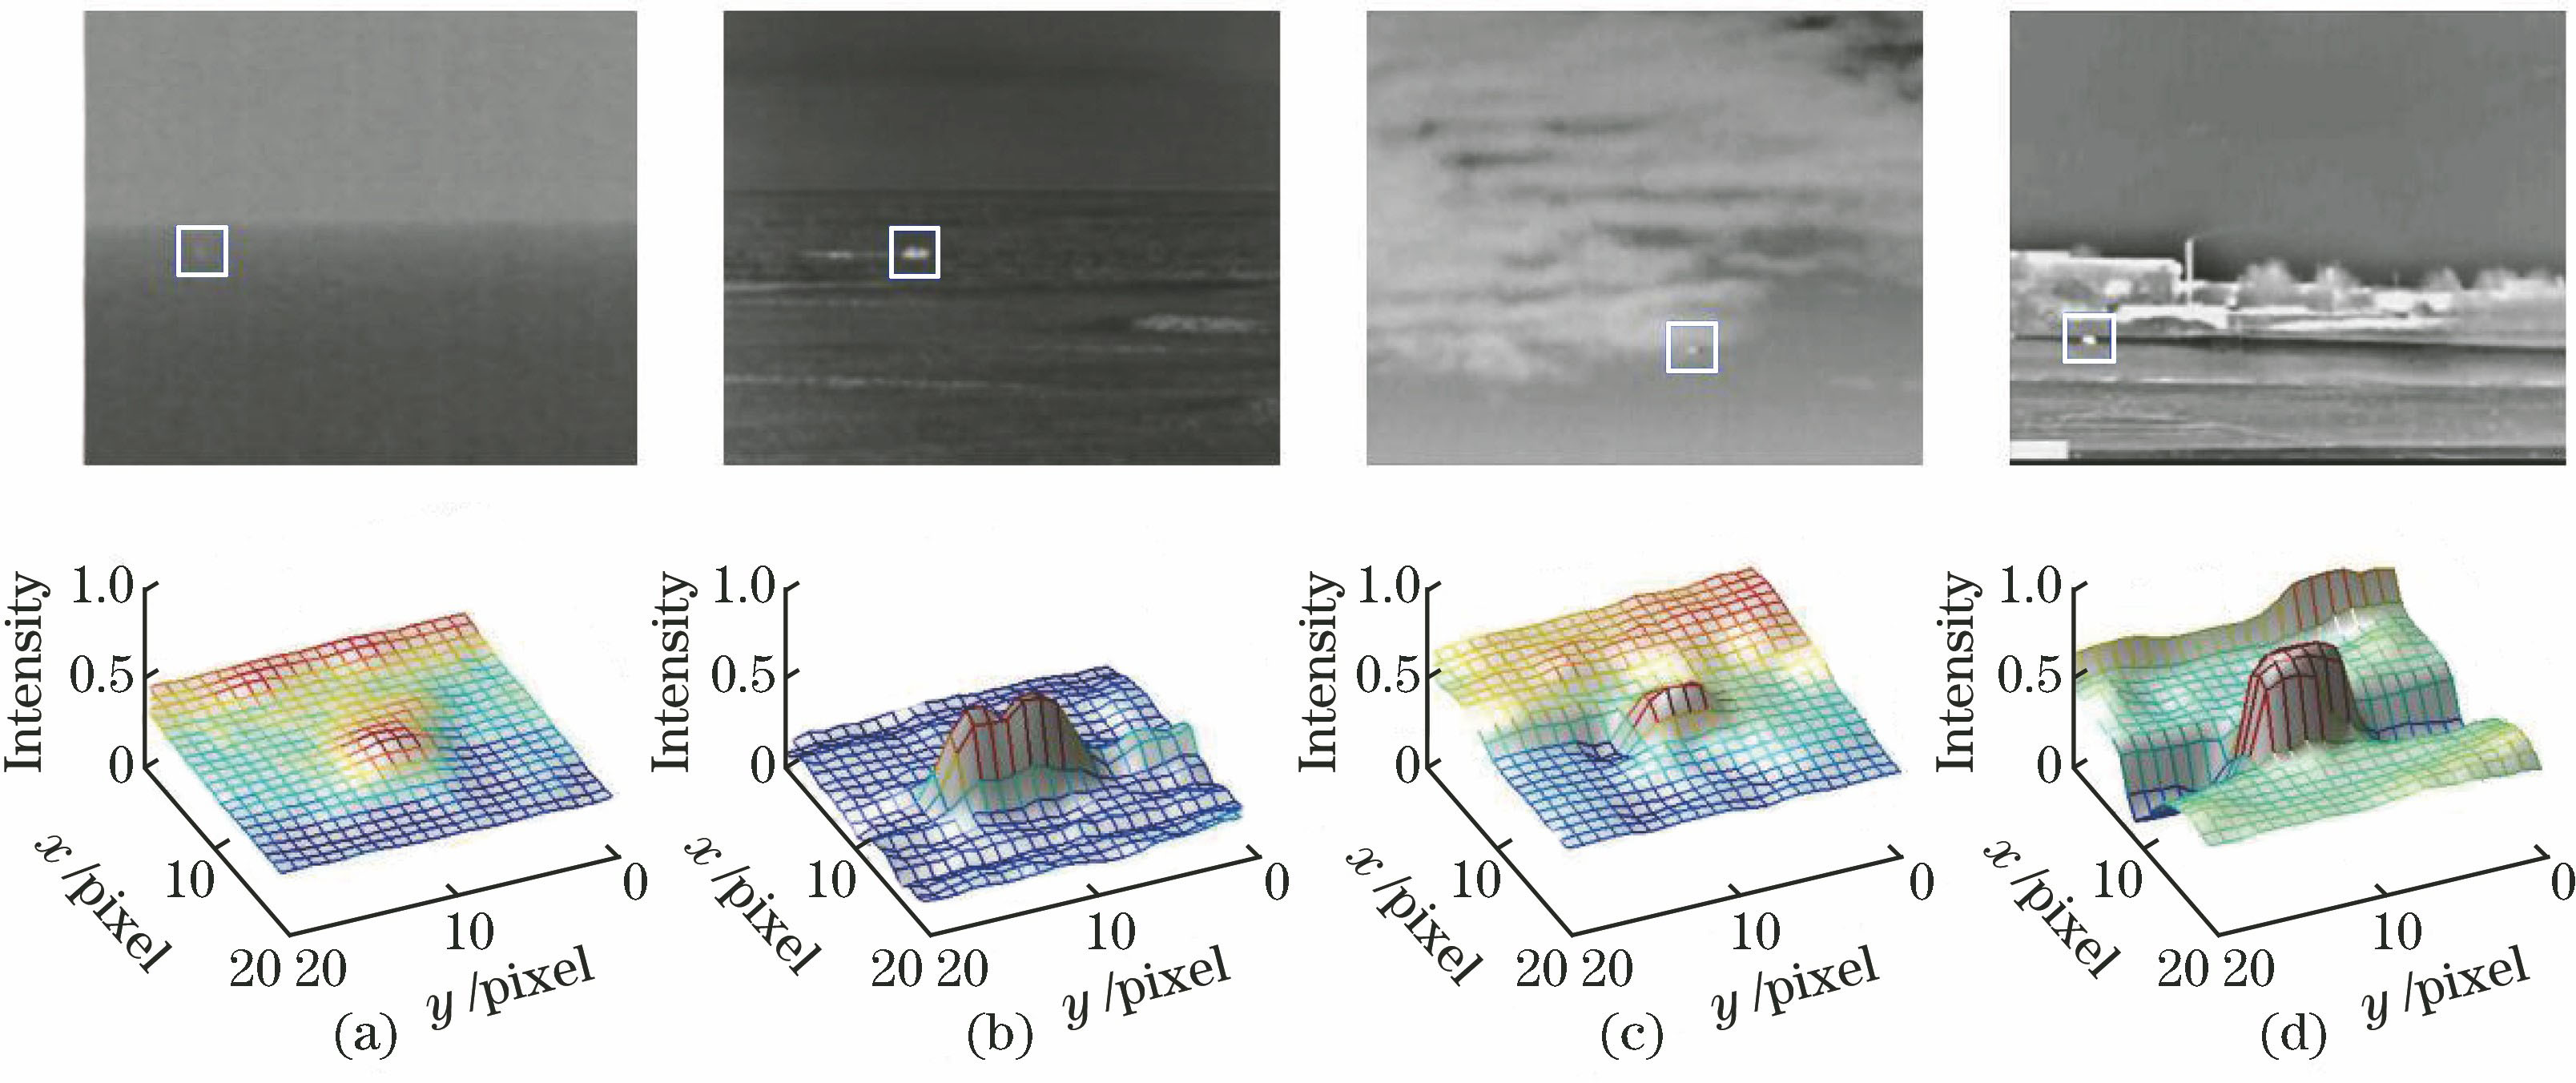 Infrared dim small targets in complex background. (a) Dim small target in sea-sky background; (b) bright target in sea-sky background; (c) dim small target in sky cloud background; (d) bright target in sky-ground background[12]